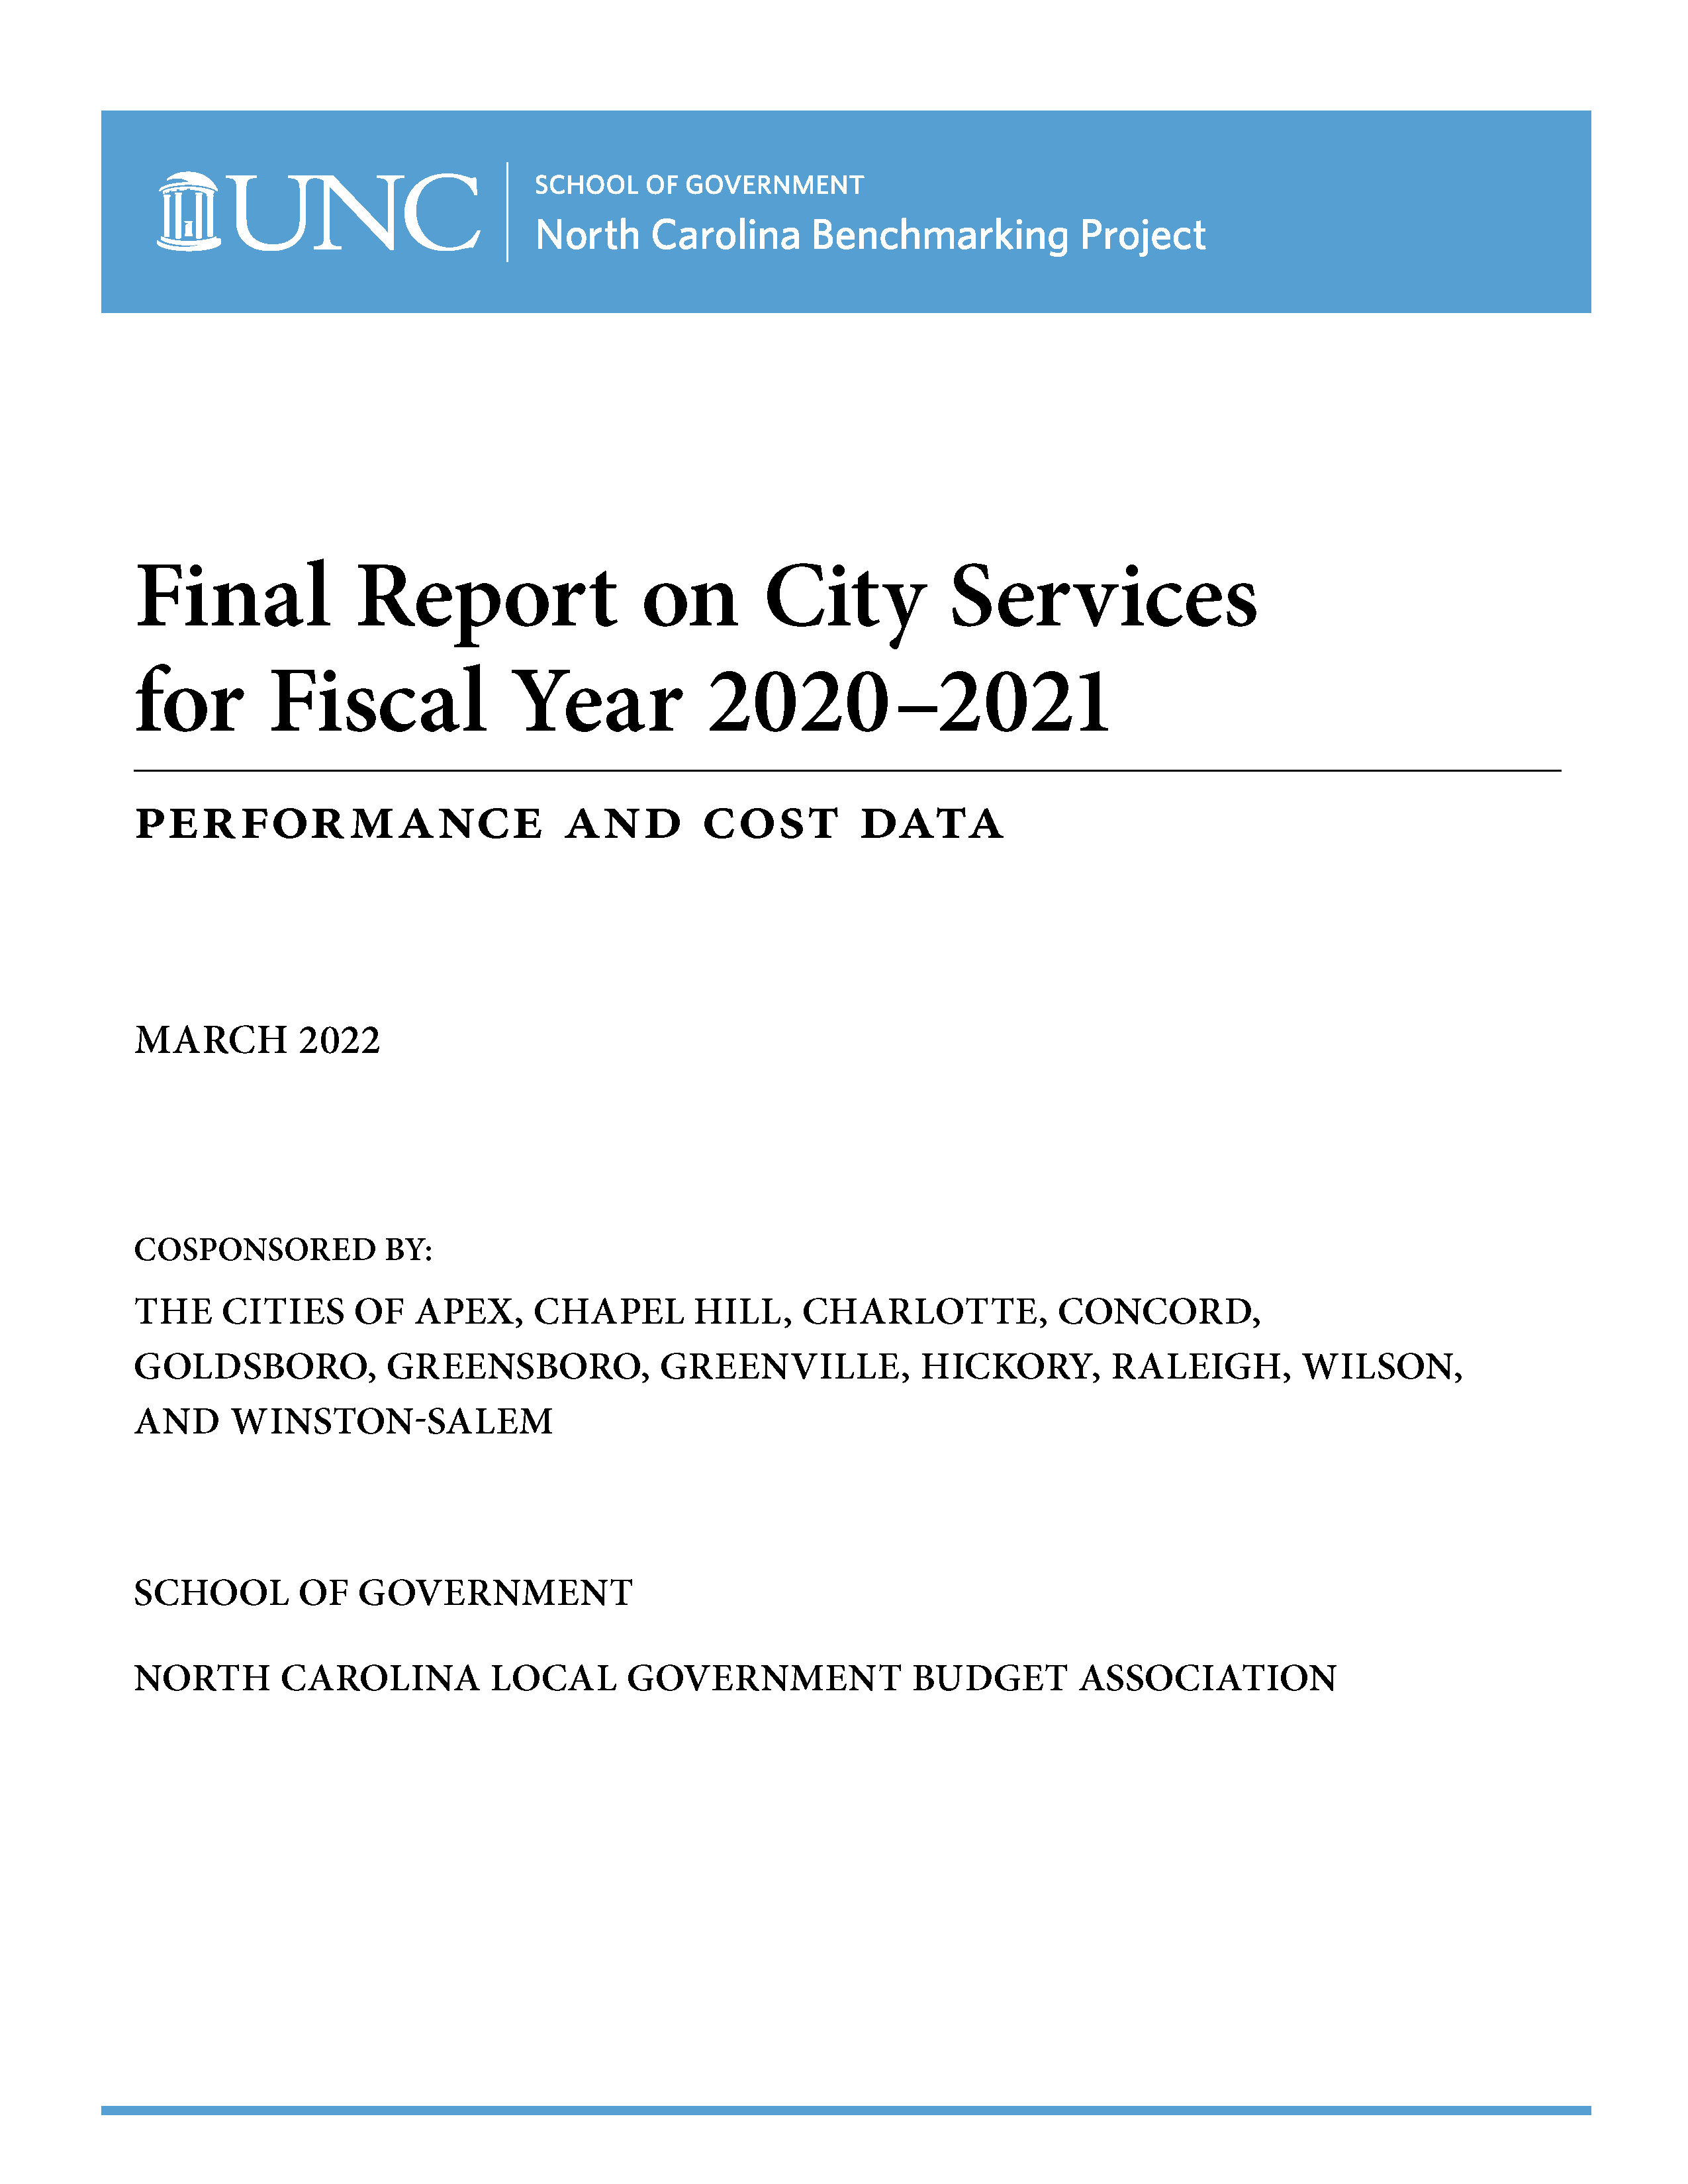 Cover image for Final Report on City Services for Fiscal Year 2020-2021: Performance and Cost Data